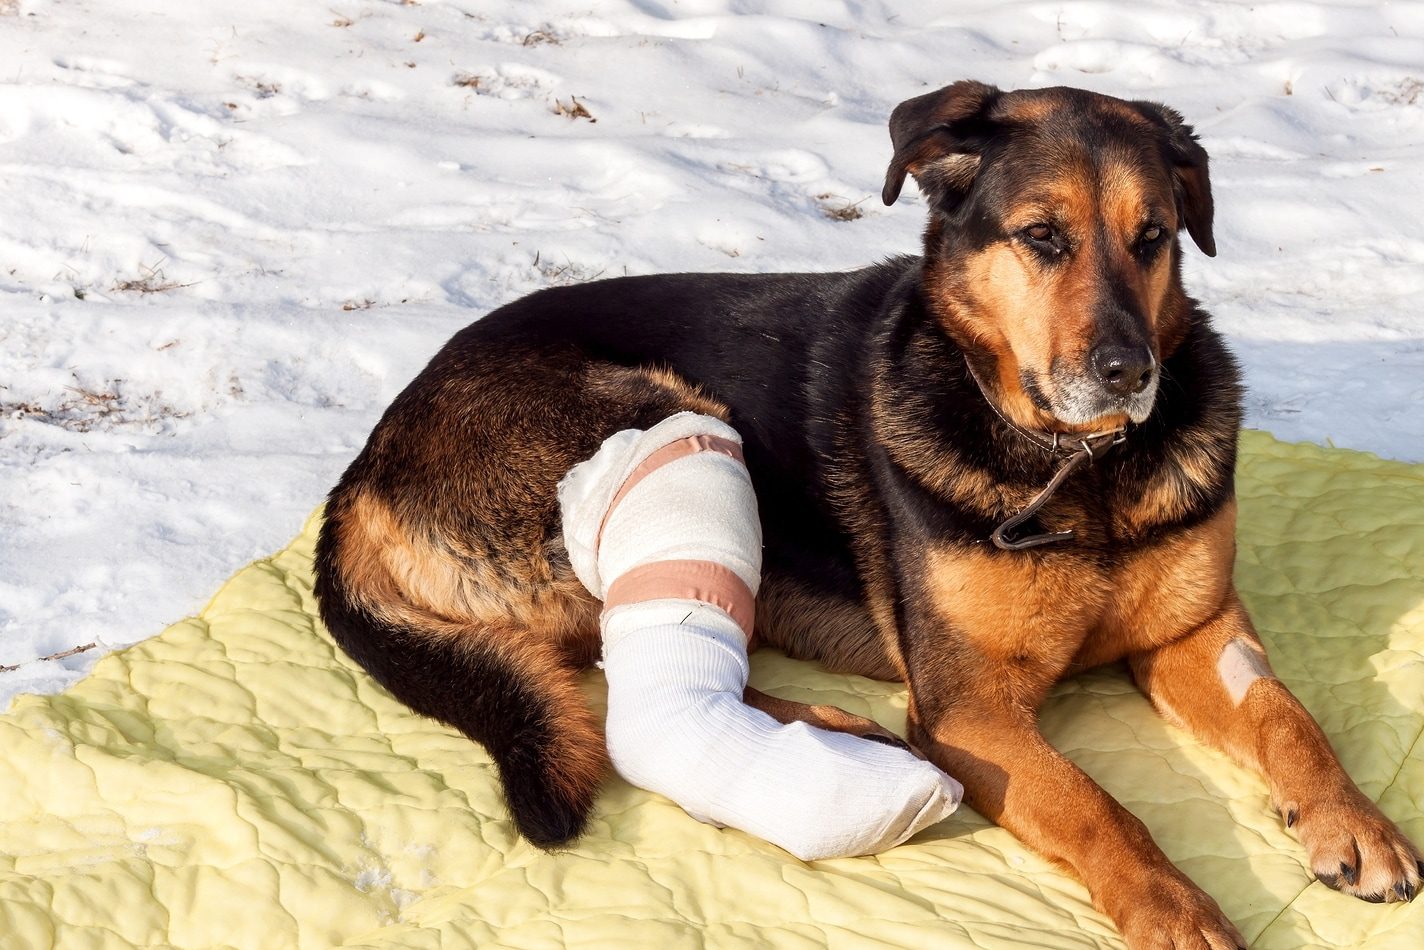 Caring for a dog with a broken leg